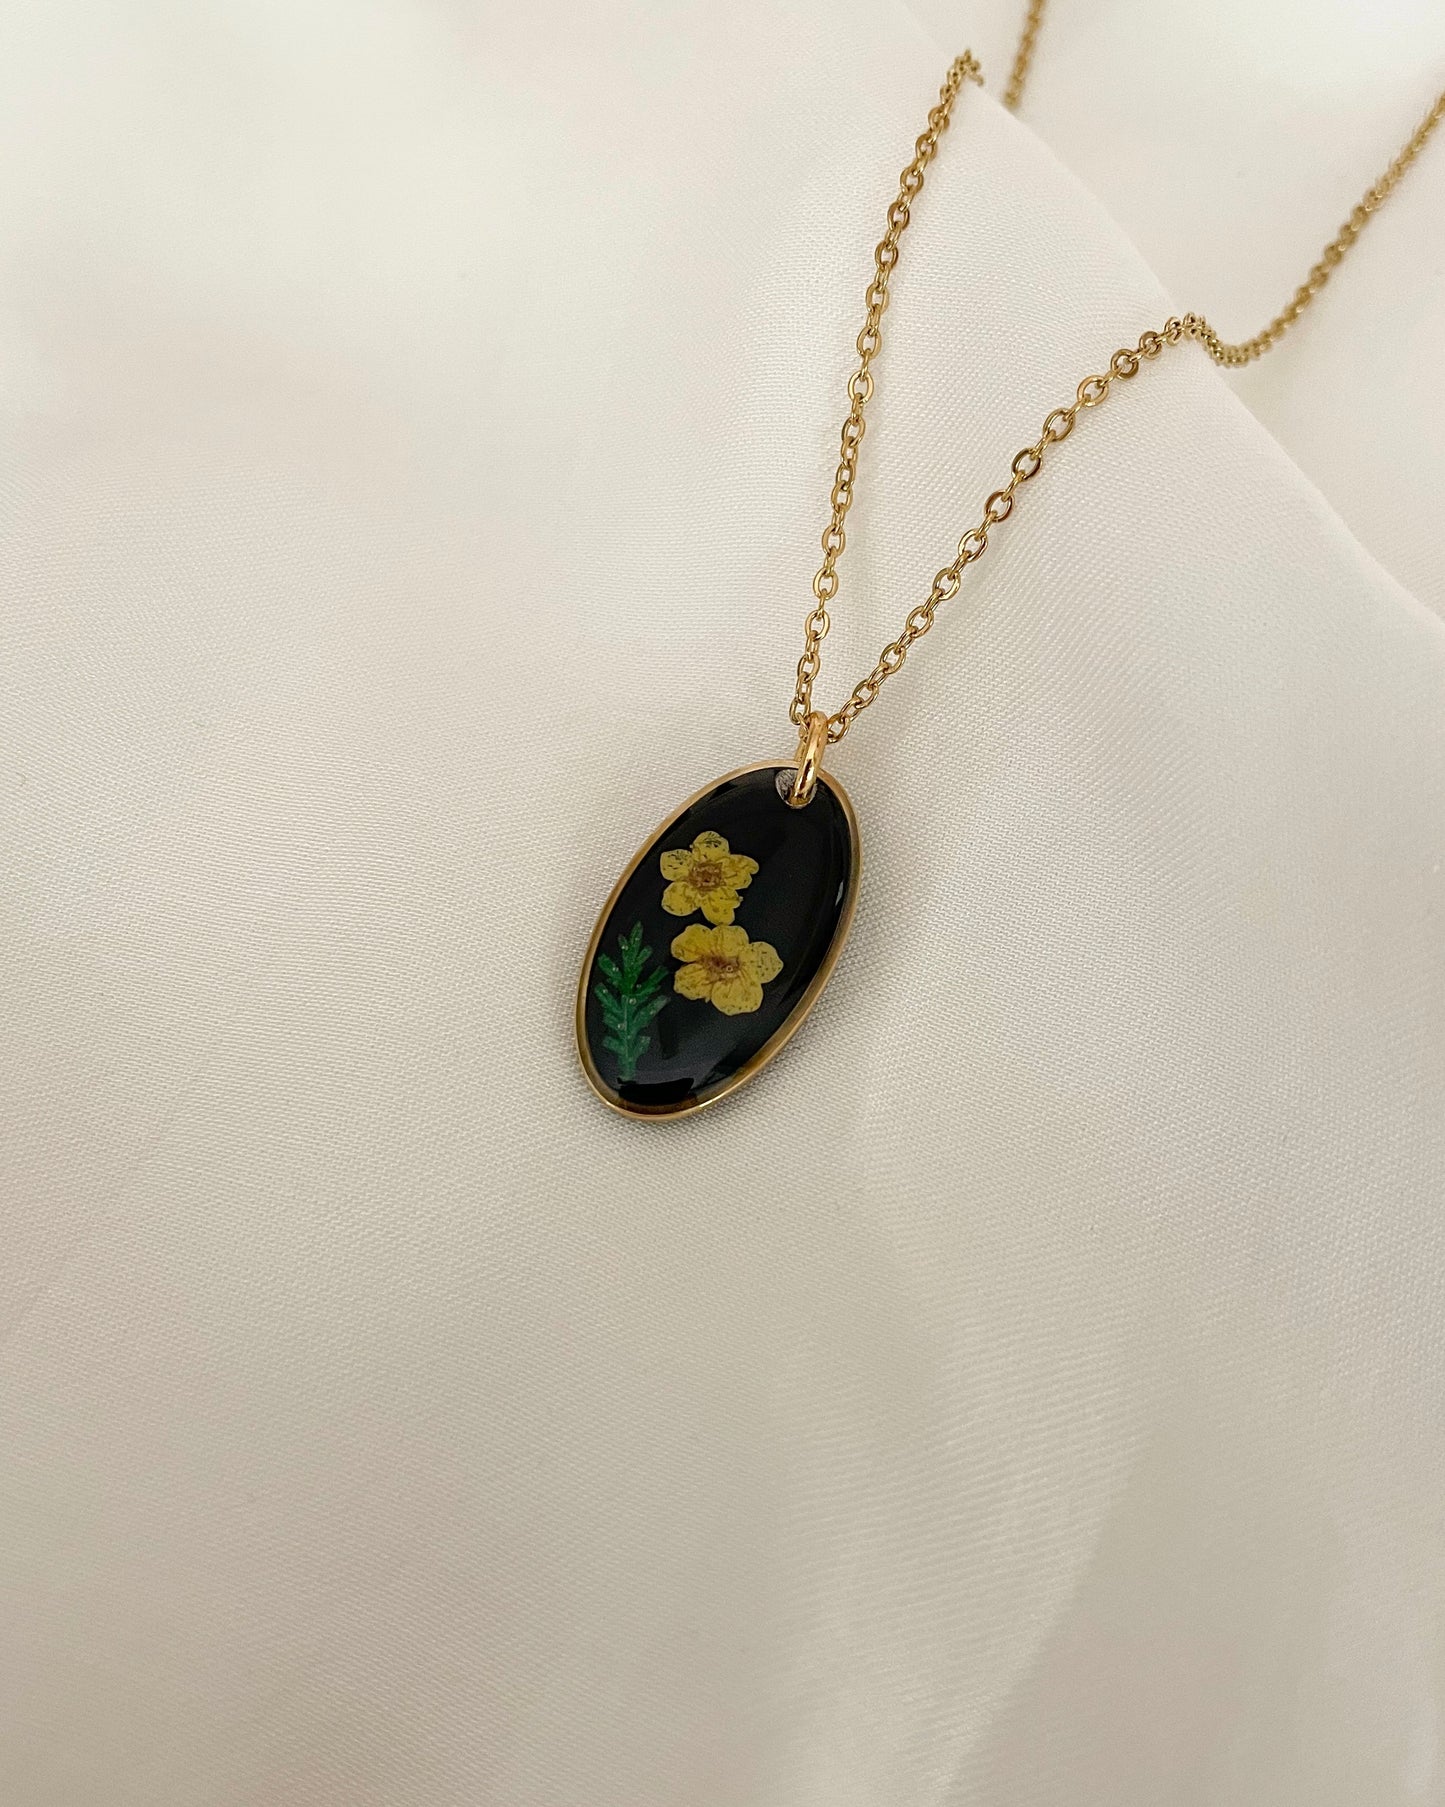 Yellow Plum Blossom Necklace